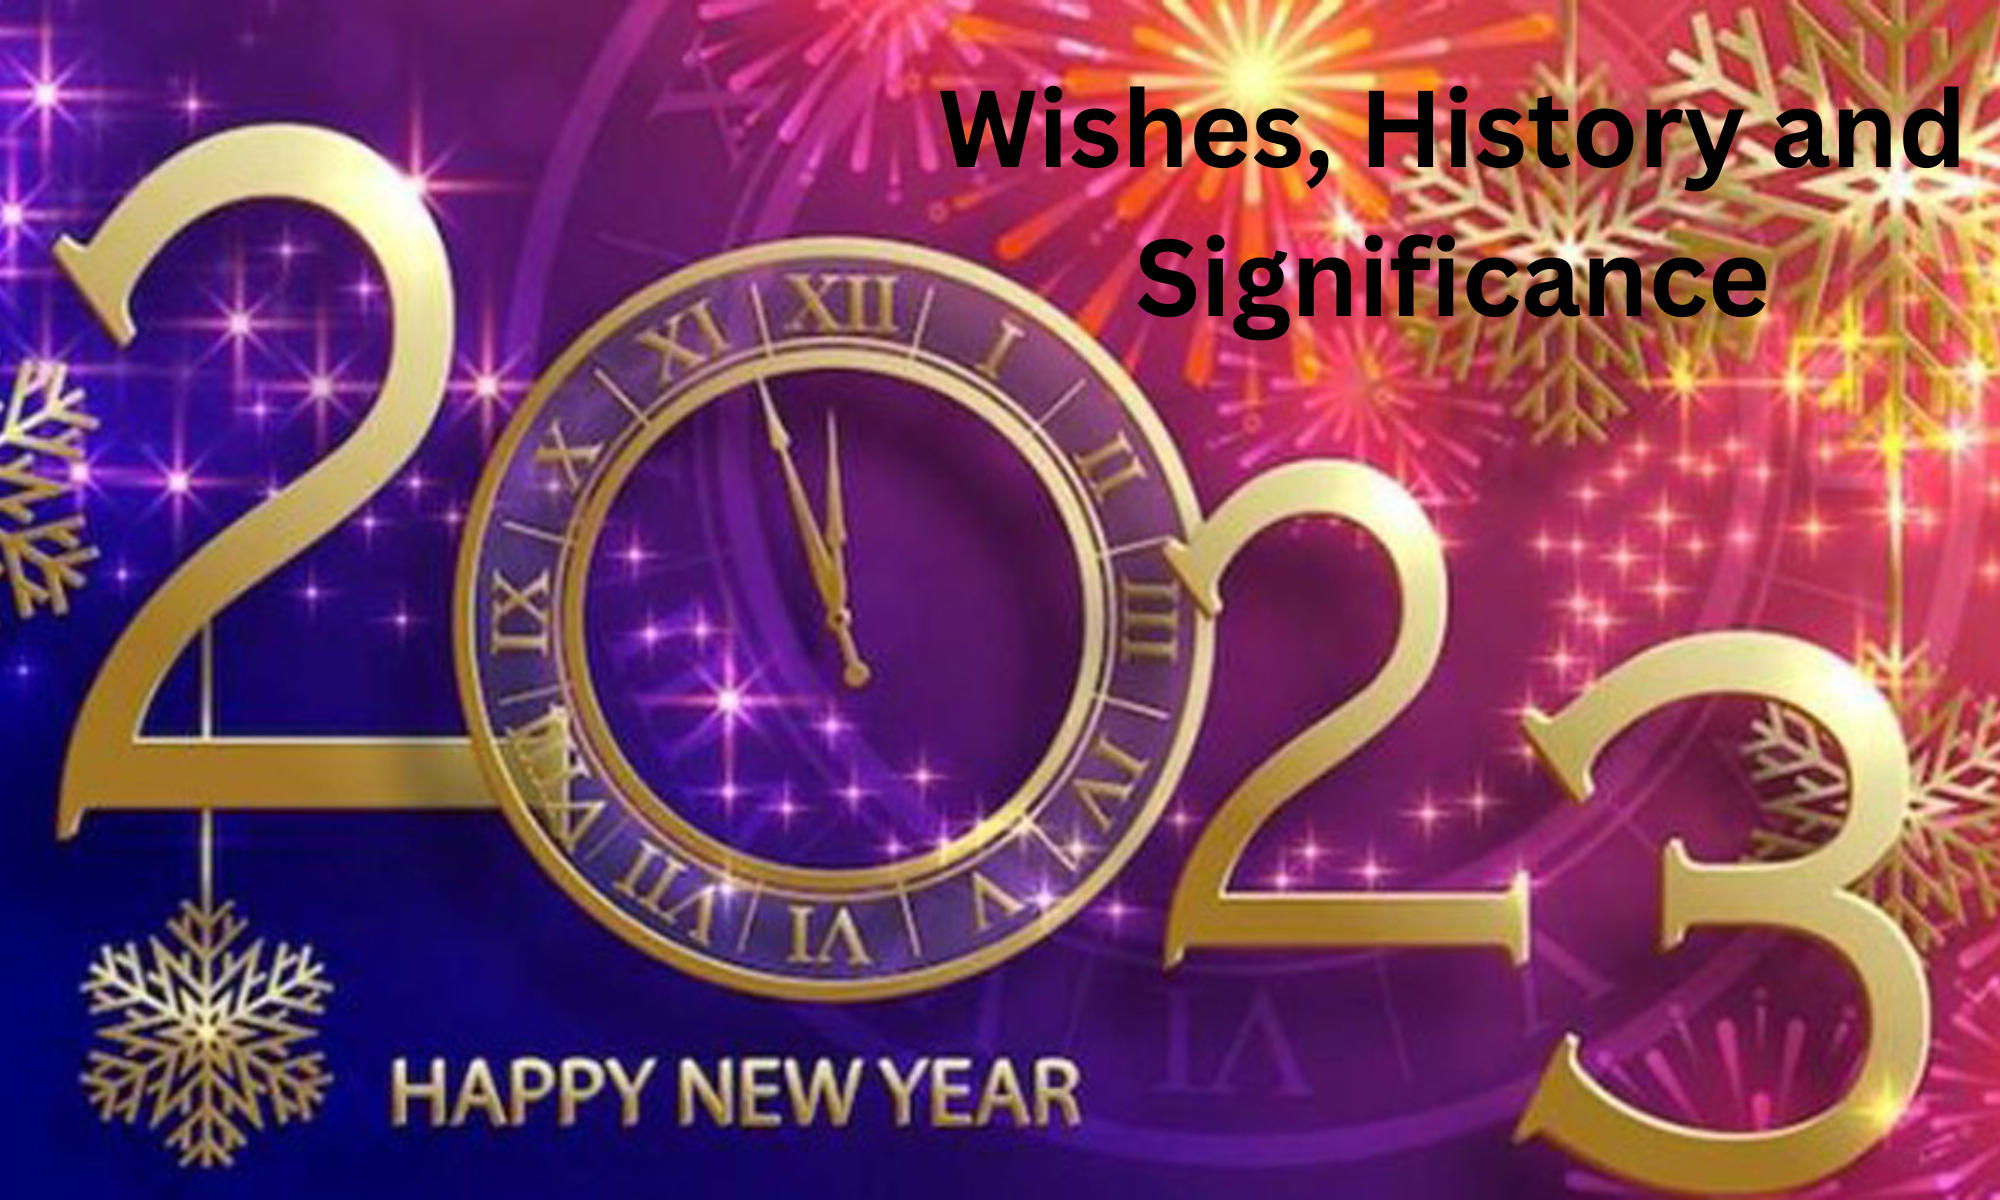 Happy New Year 2023 Background, Significance, History and Wishes